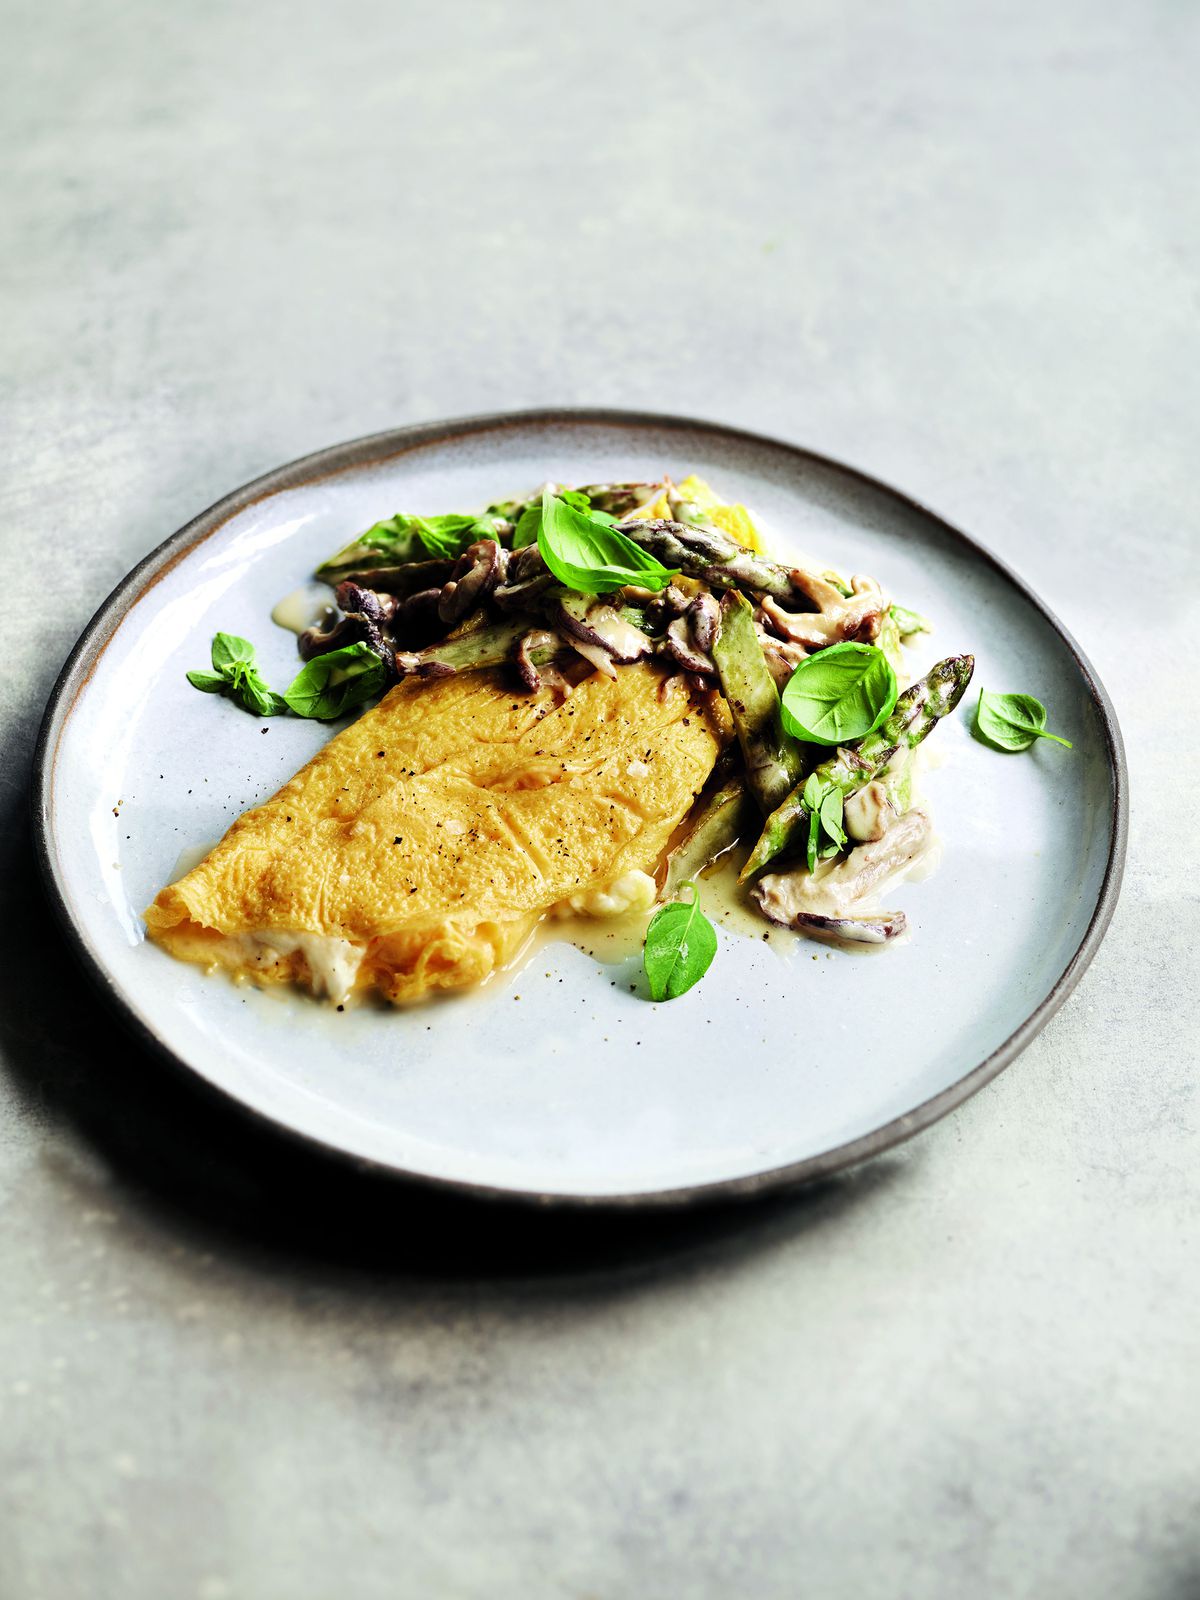 This image posted by Hachette Book Group shows a recipe for mozzarella and basil omelette with asparagus and shiitake mushrooms from Gordon Ramsay's new book 